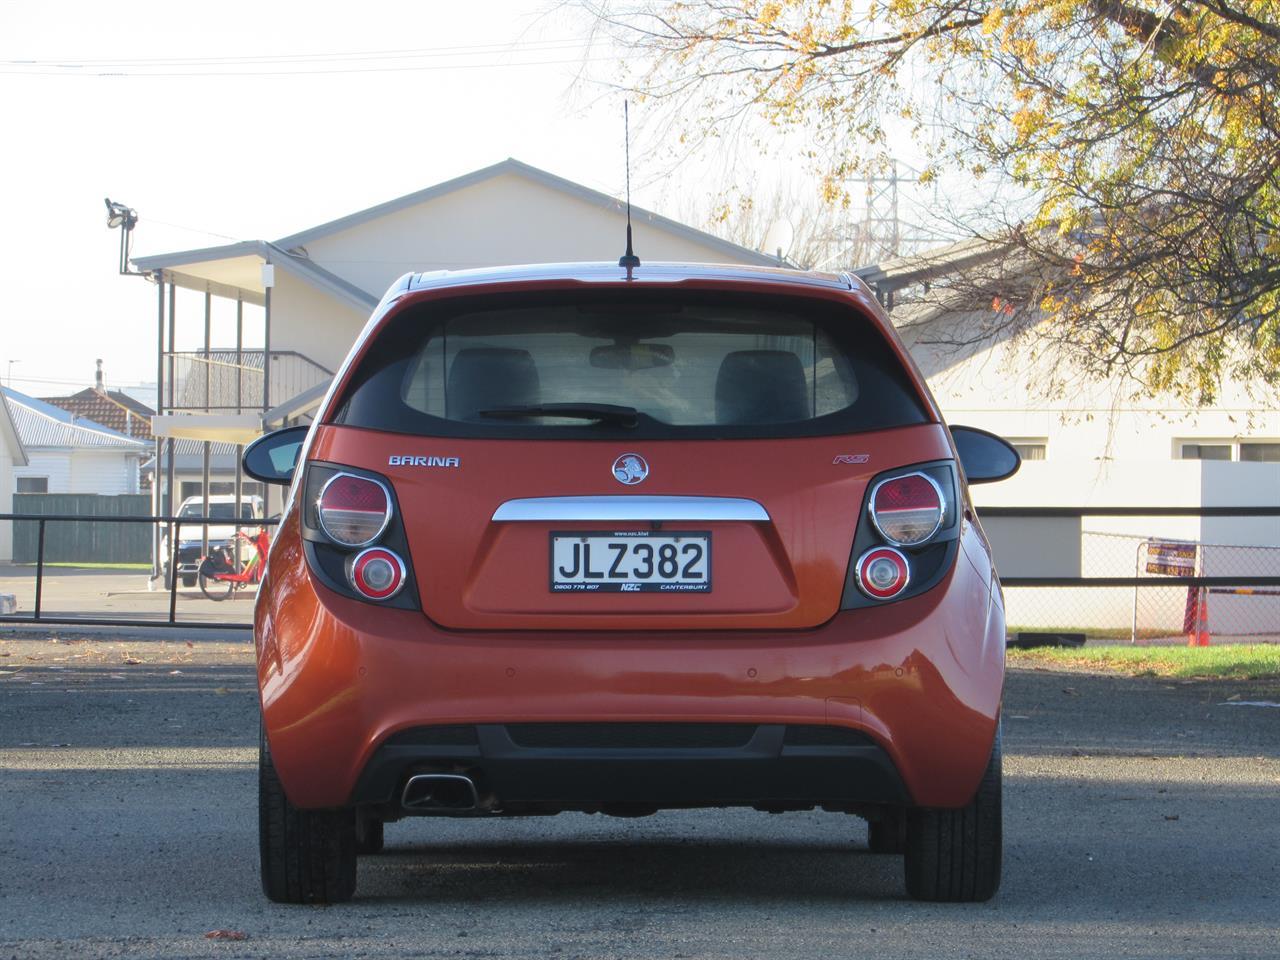 2015 Holden BARINA only $55 weekly